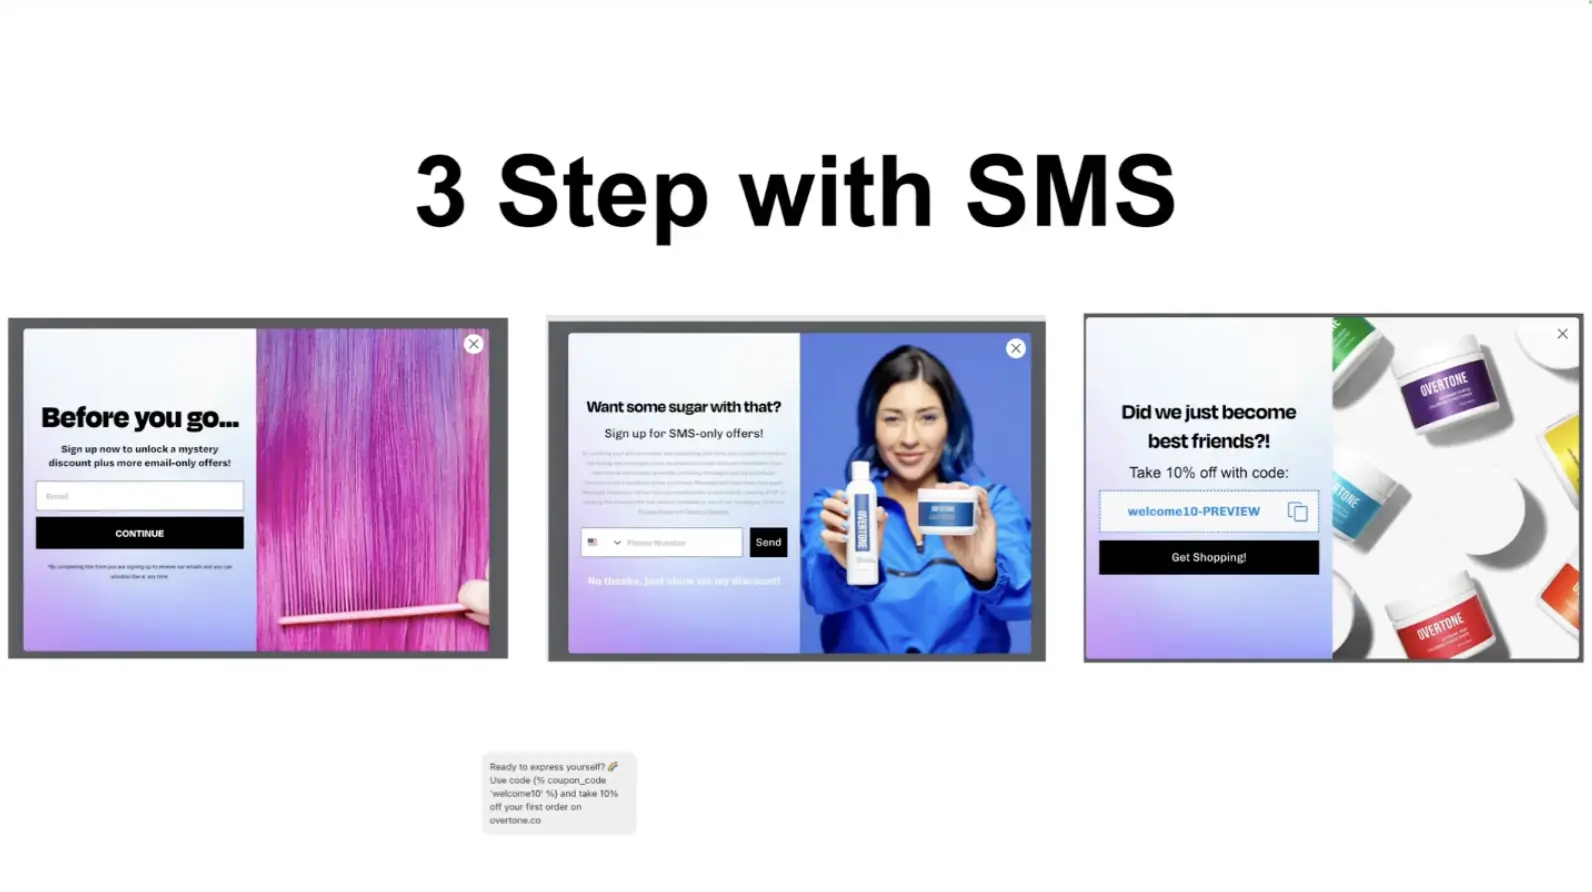 The image shows a multi-step form that asks for email and phone number to grow the email and SMS lists of brand oVertone. The final step gives the consumer a discount in exchange for this information. 